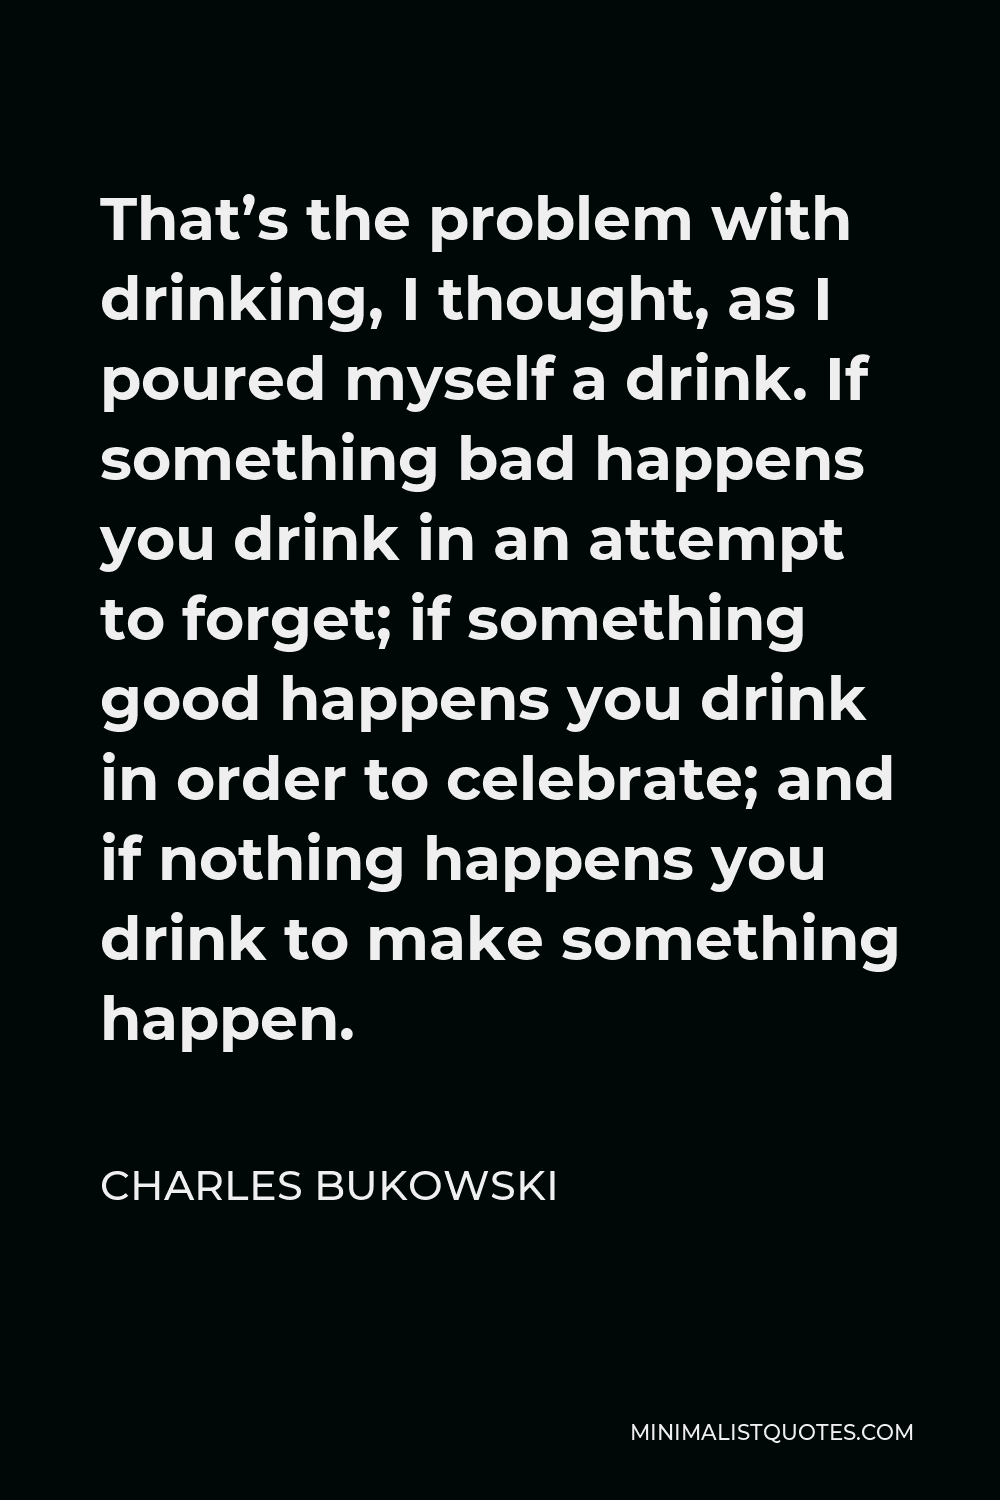 Charles Bukowski Quote: That's the problem with drinking, I thought, as ...